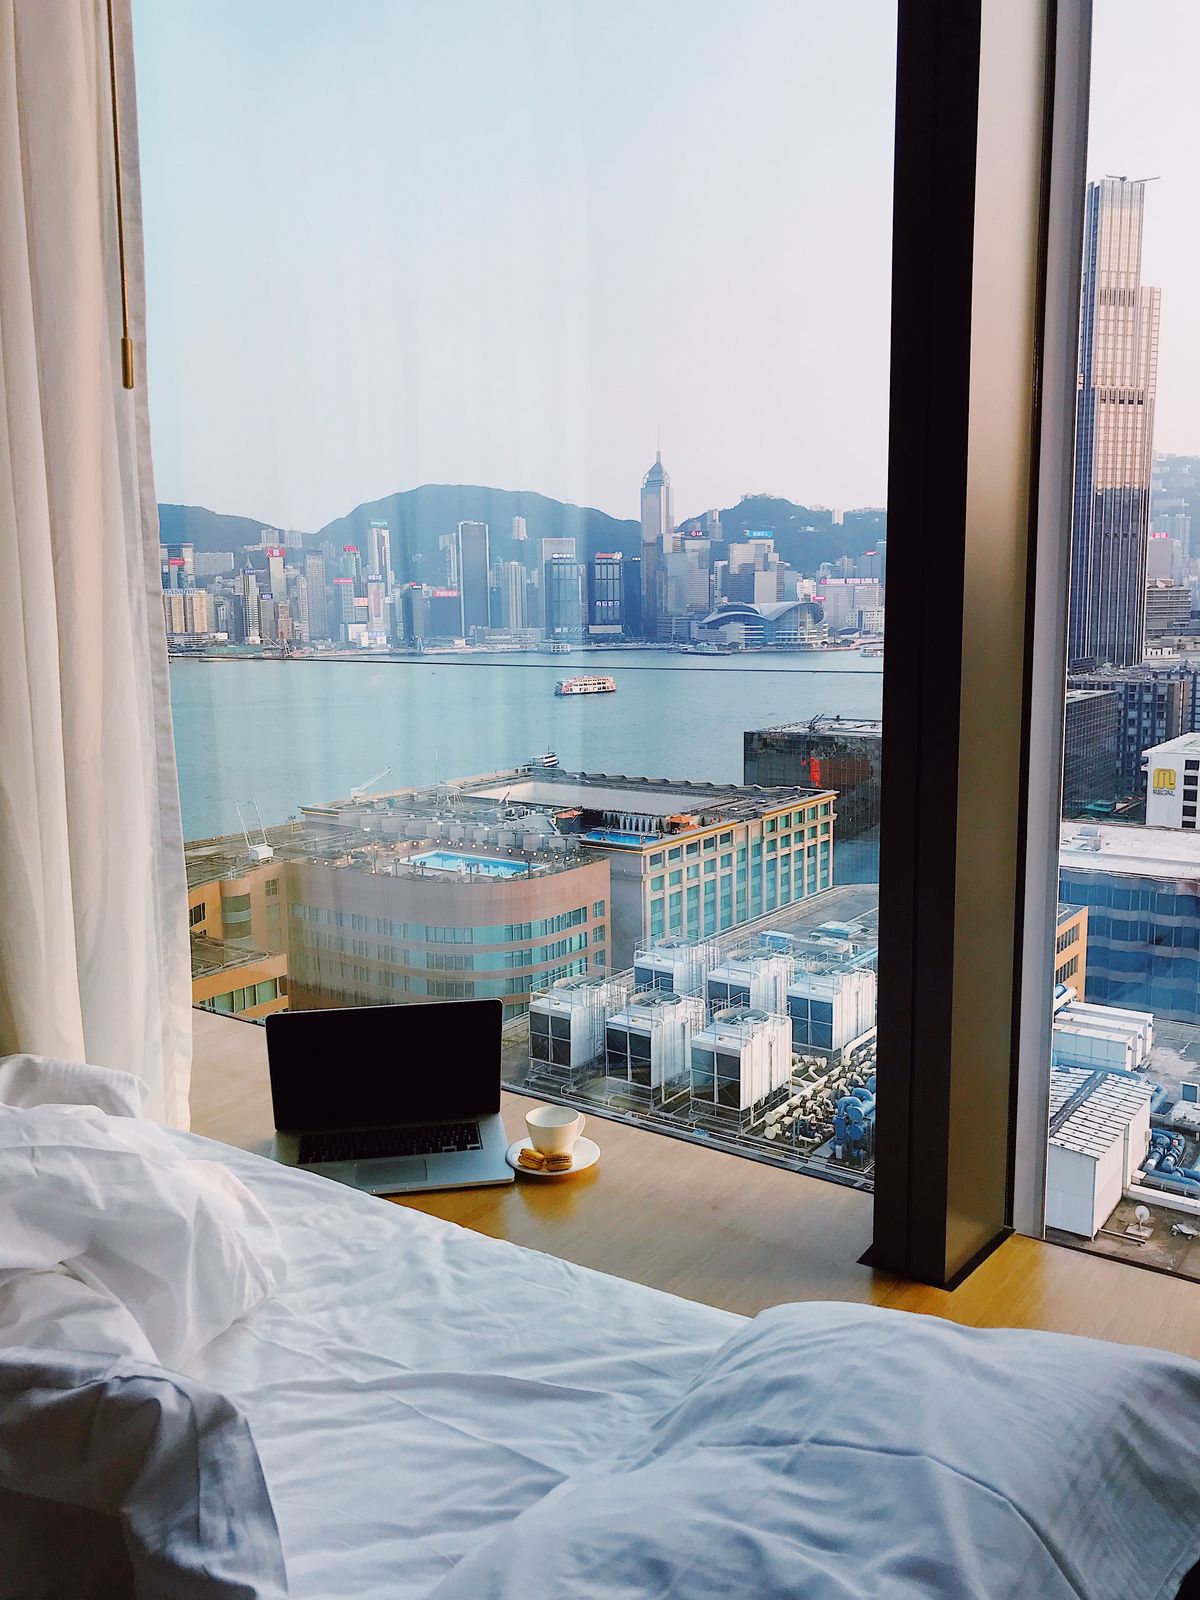 Looking for a serviced apartment in Hong Kong? Check out these top 8